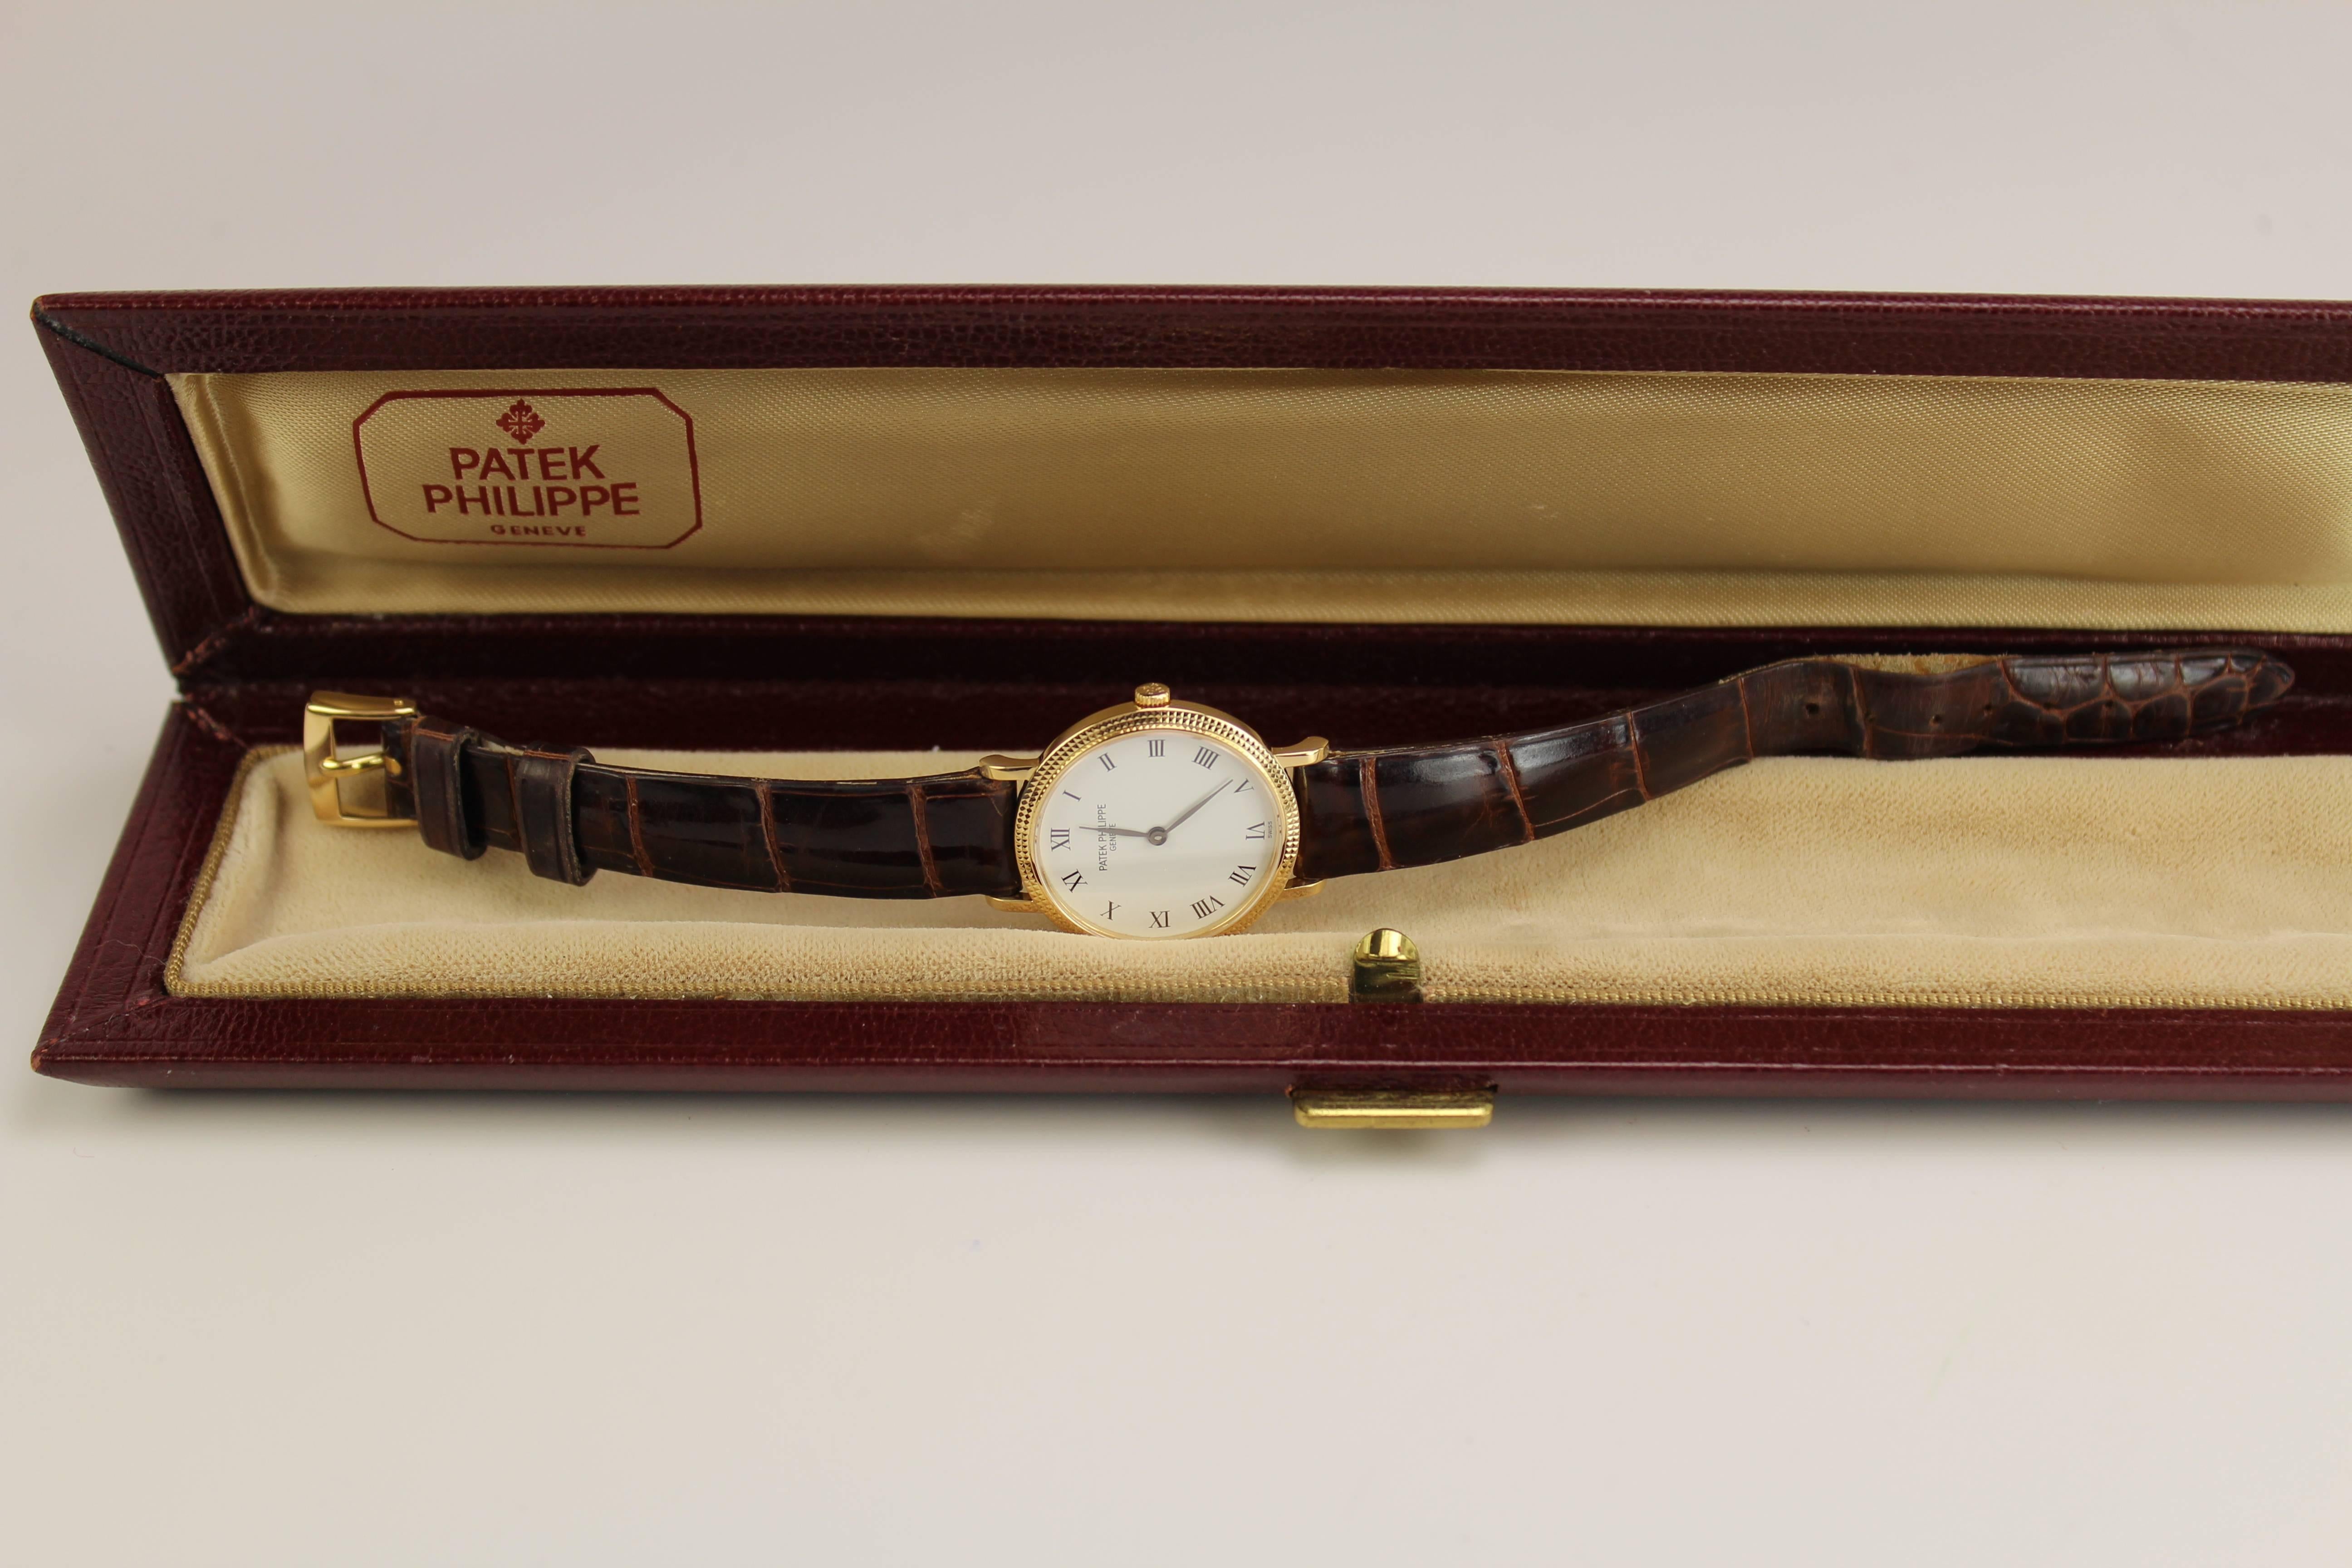 This is a classic Patek Philippe lady's Calatrava with a hobnail case, original strap with buckle, and is run with a quartz movement. Comes with box.